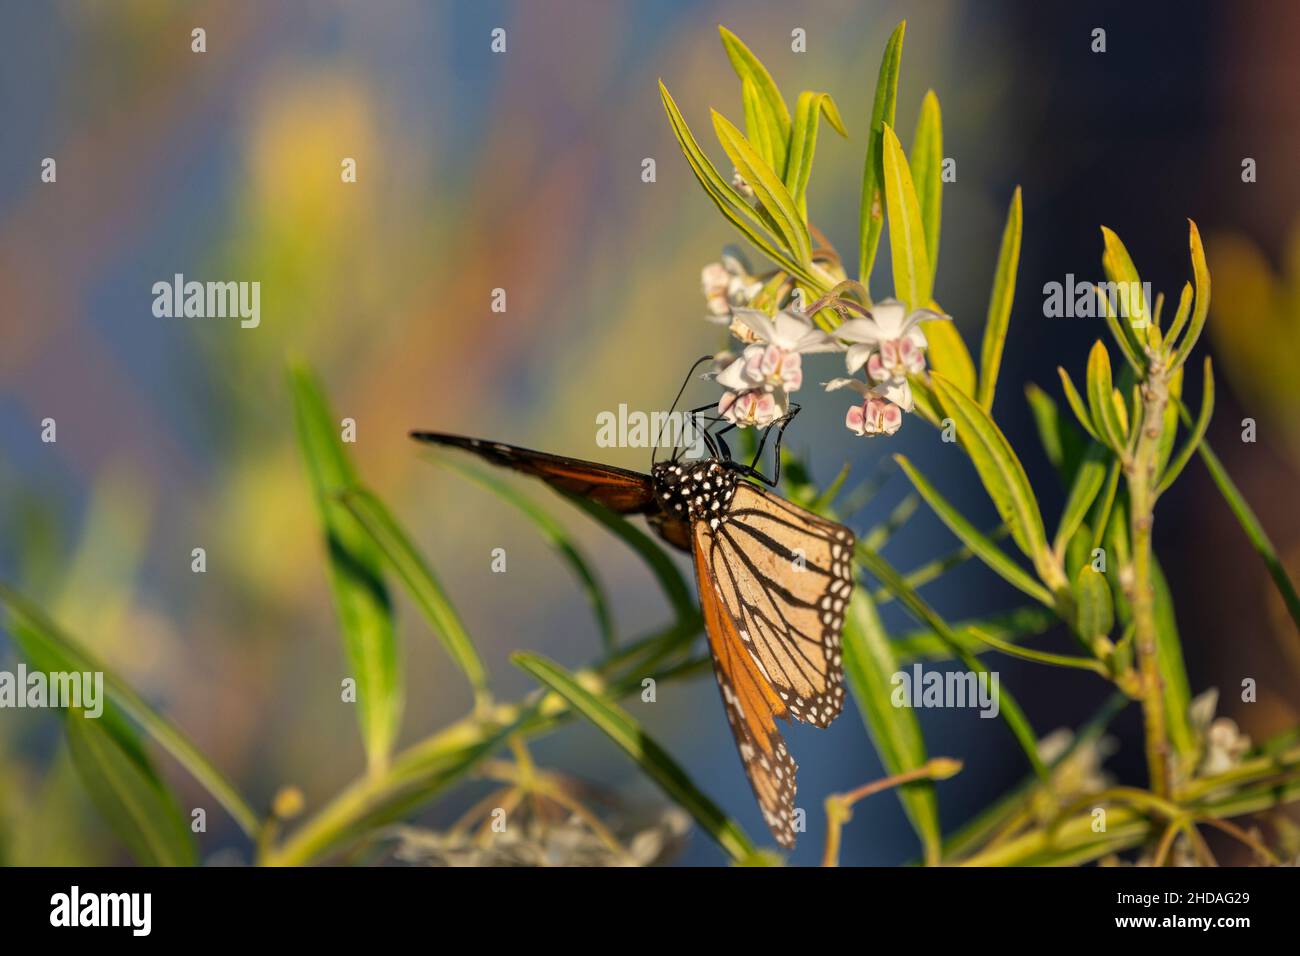 Monarch butterfly feeding on milkweed flowers. Soft blue door with flowers background. Stock Photo